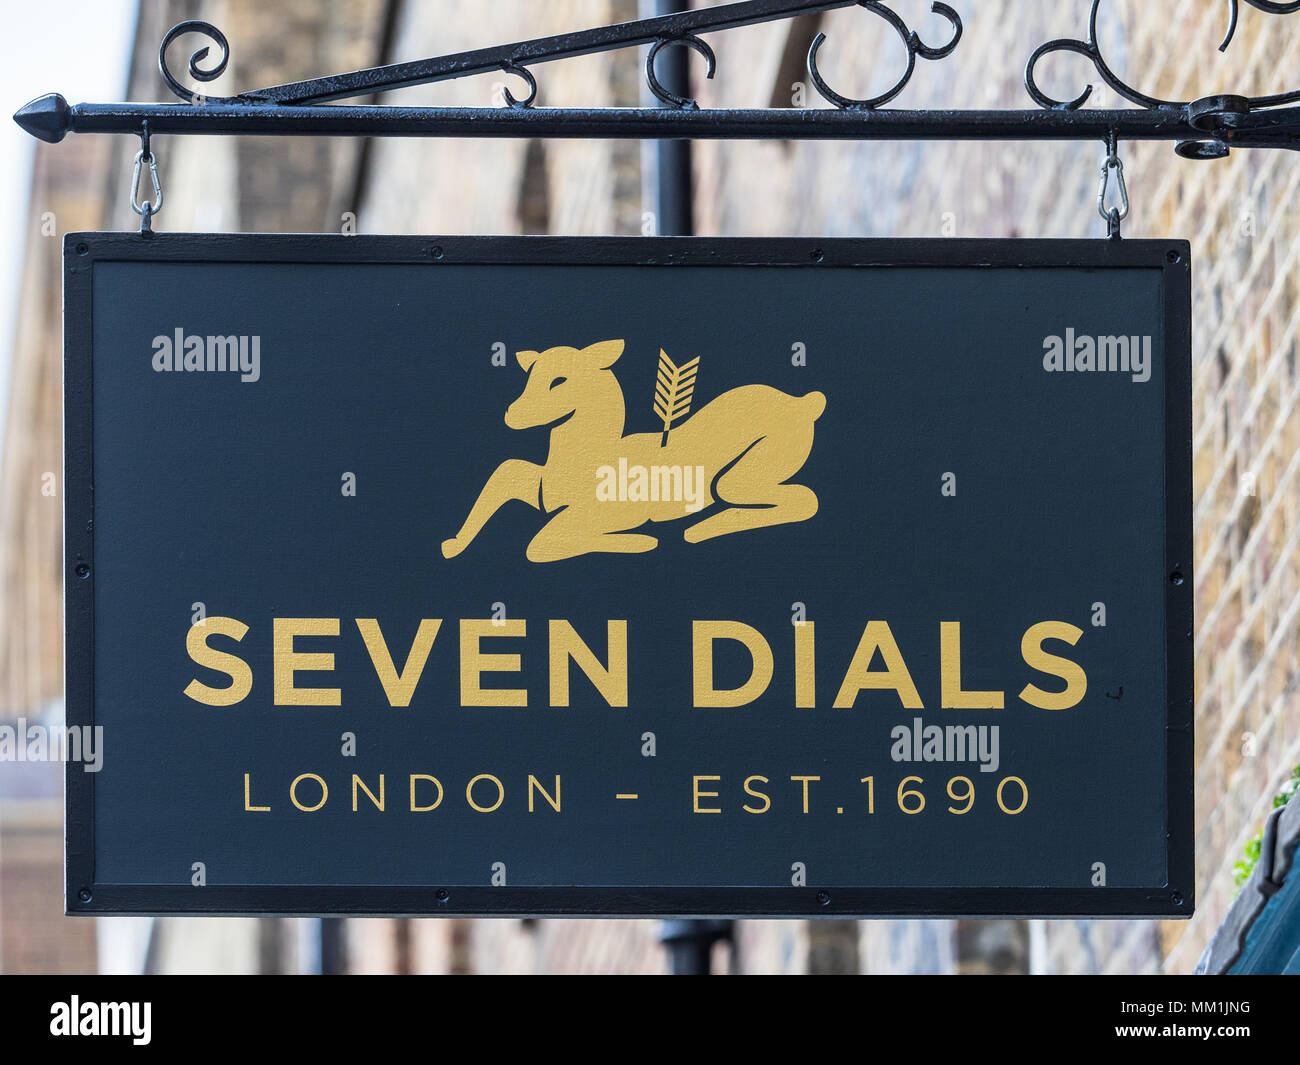 London Seven Dials - sign above a vacant shop in London's Seven Dials district in the West End Stock Photo